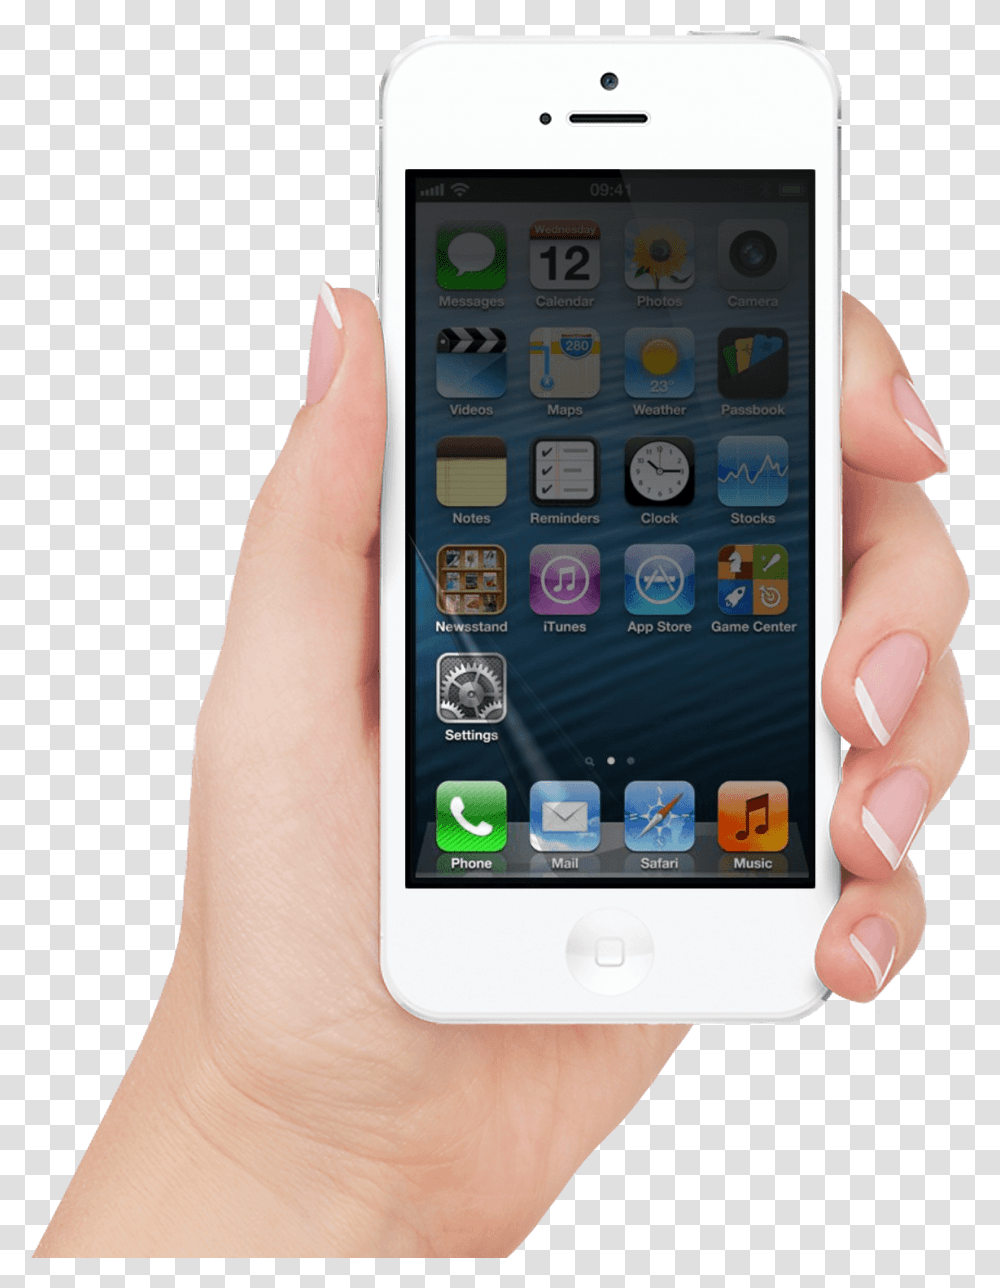 Phone In Hand Image Black Iphone 5s Price, Mobile Phone, Electronics, Cell Phone, Person Transparent Png